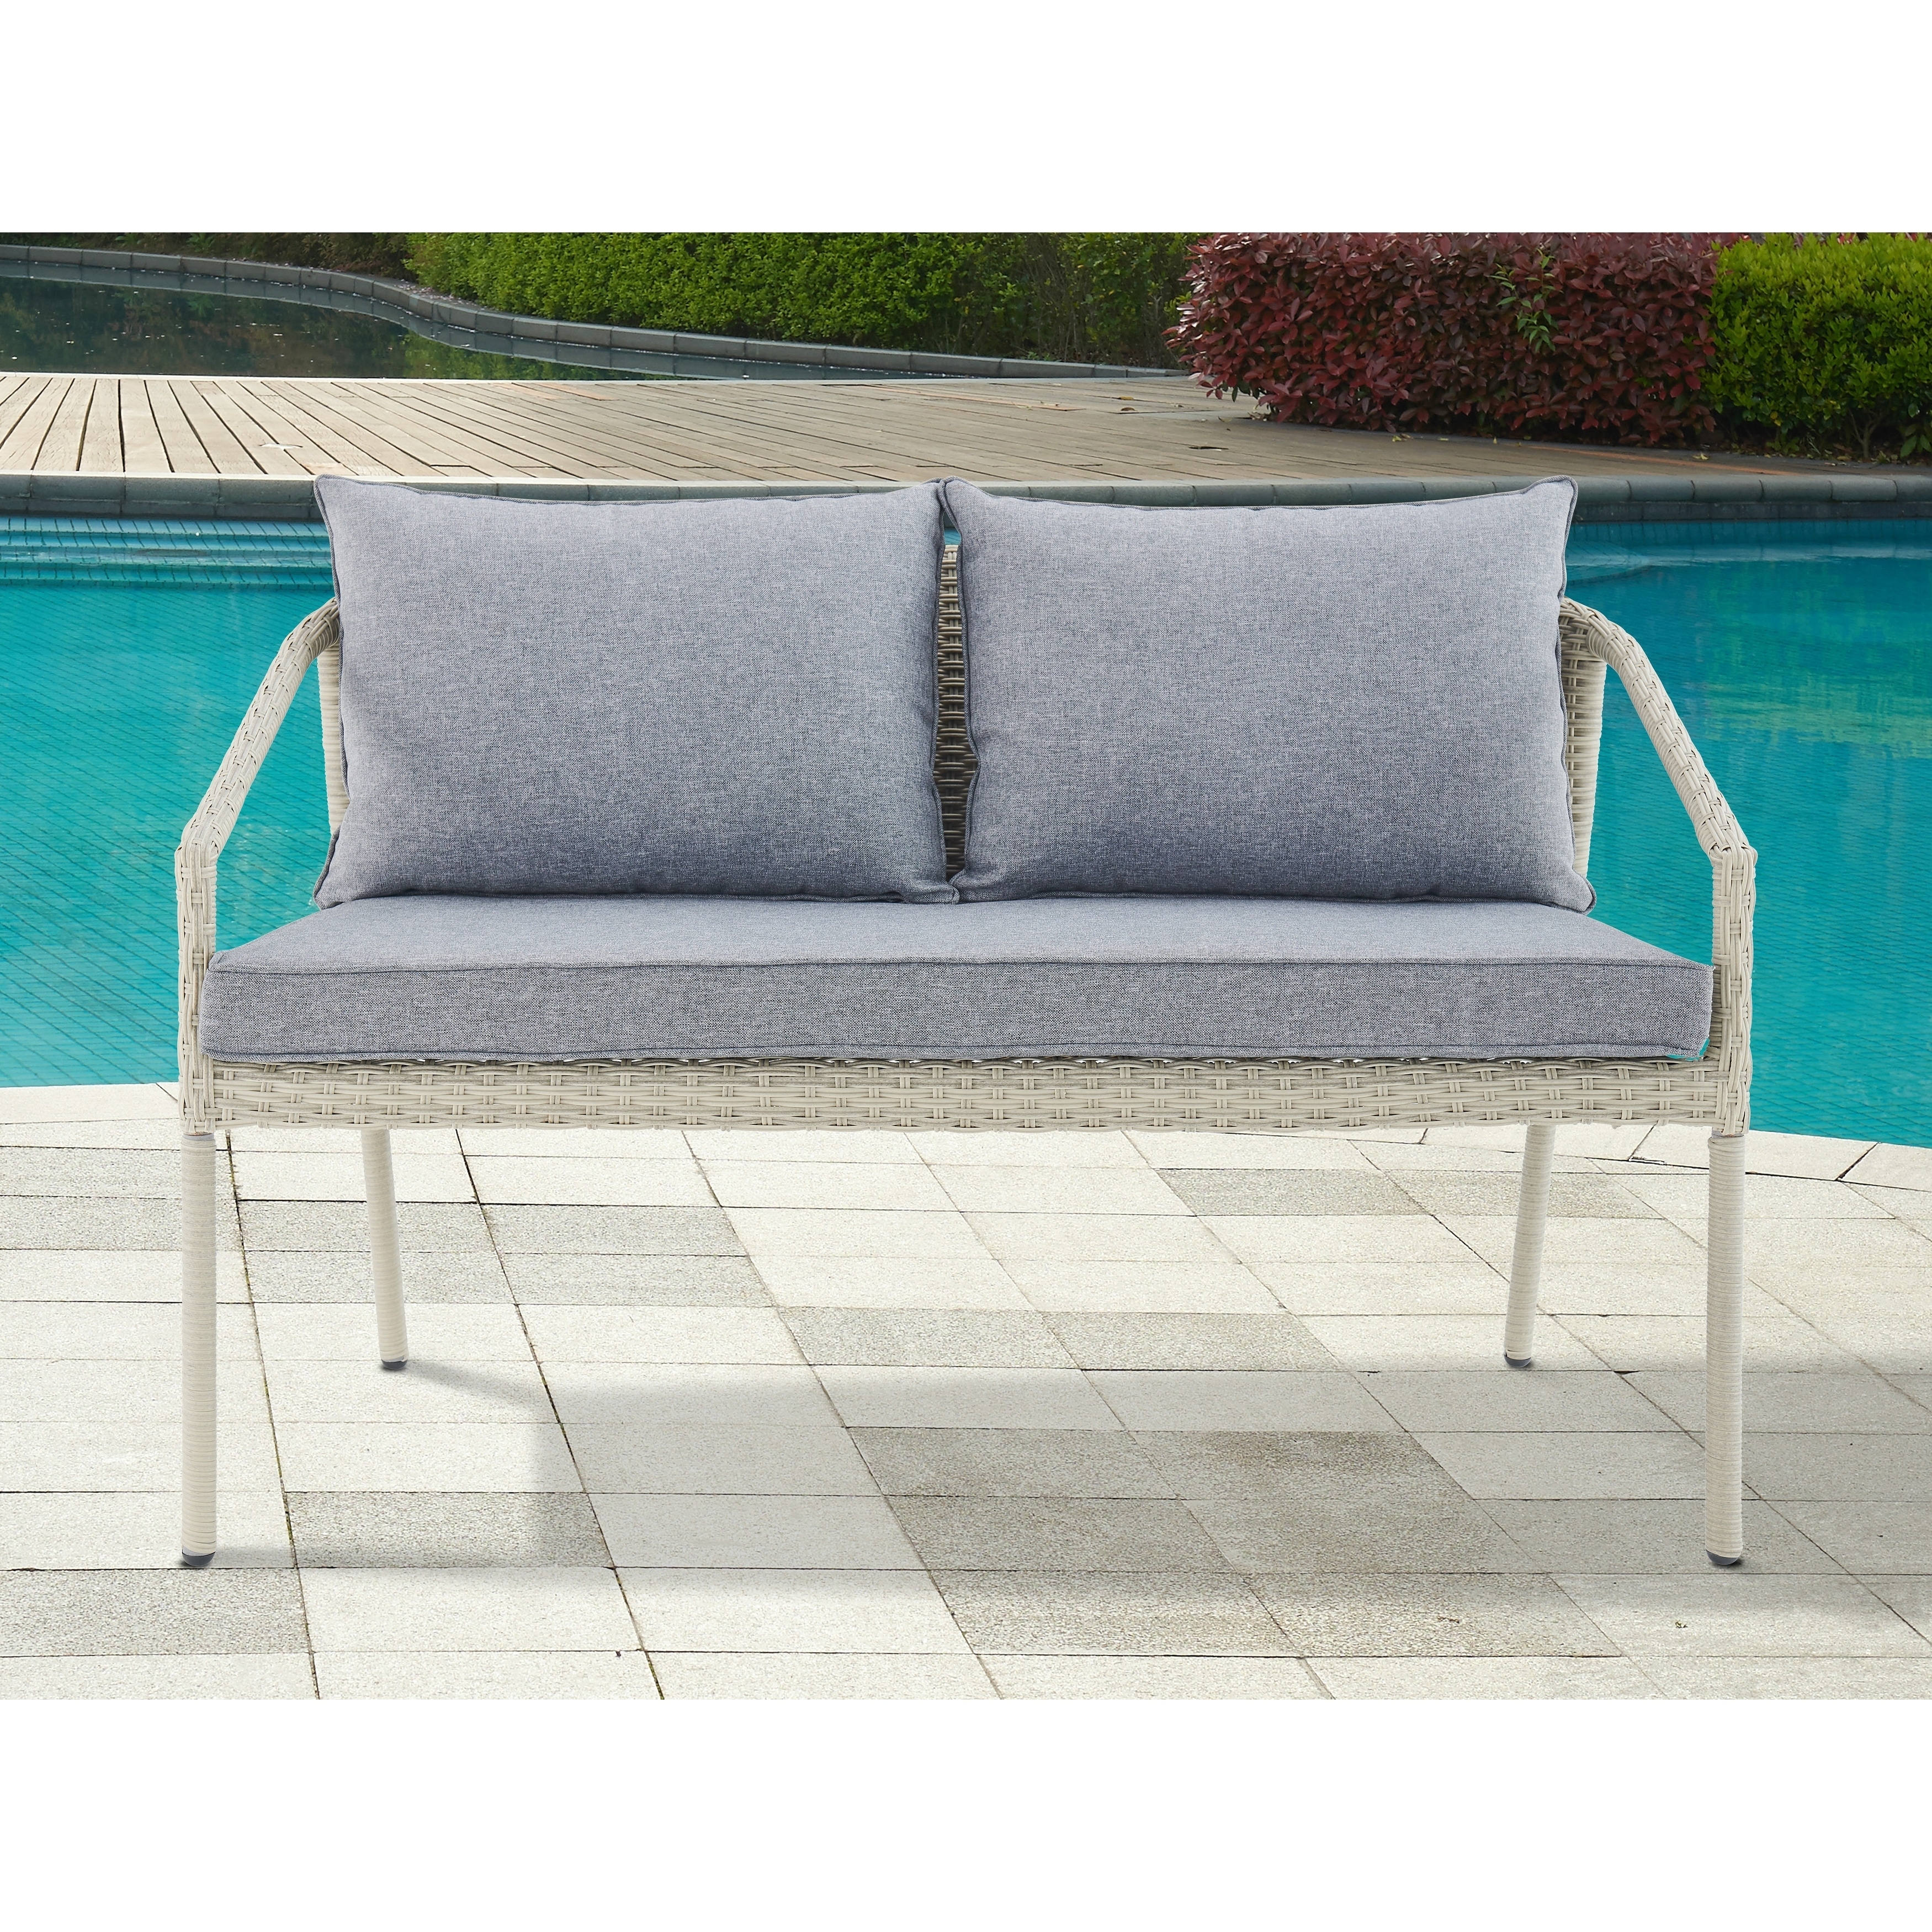 Lachica Light Grey Wicker Cushioned Outdoor Loveseat Bench By Havenside Home